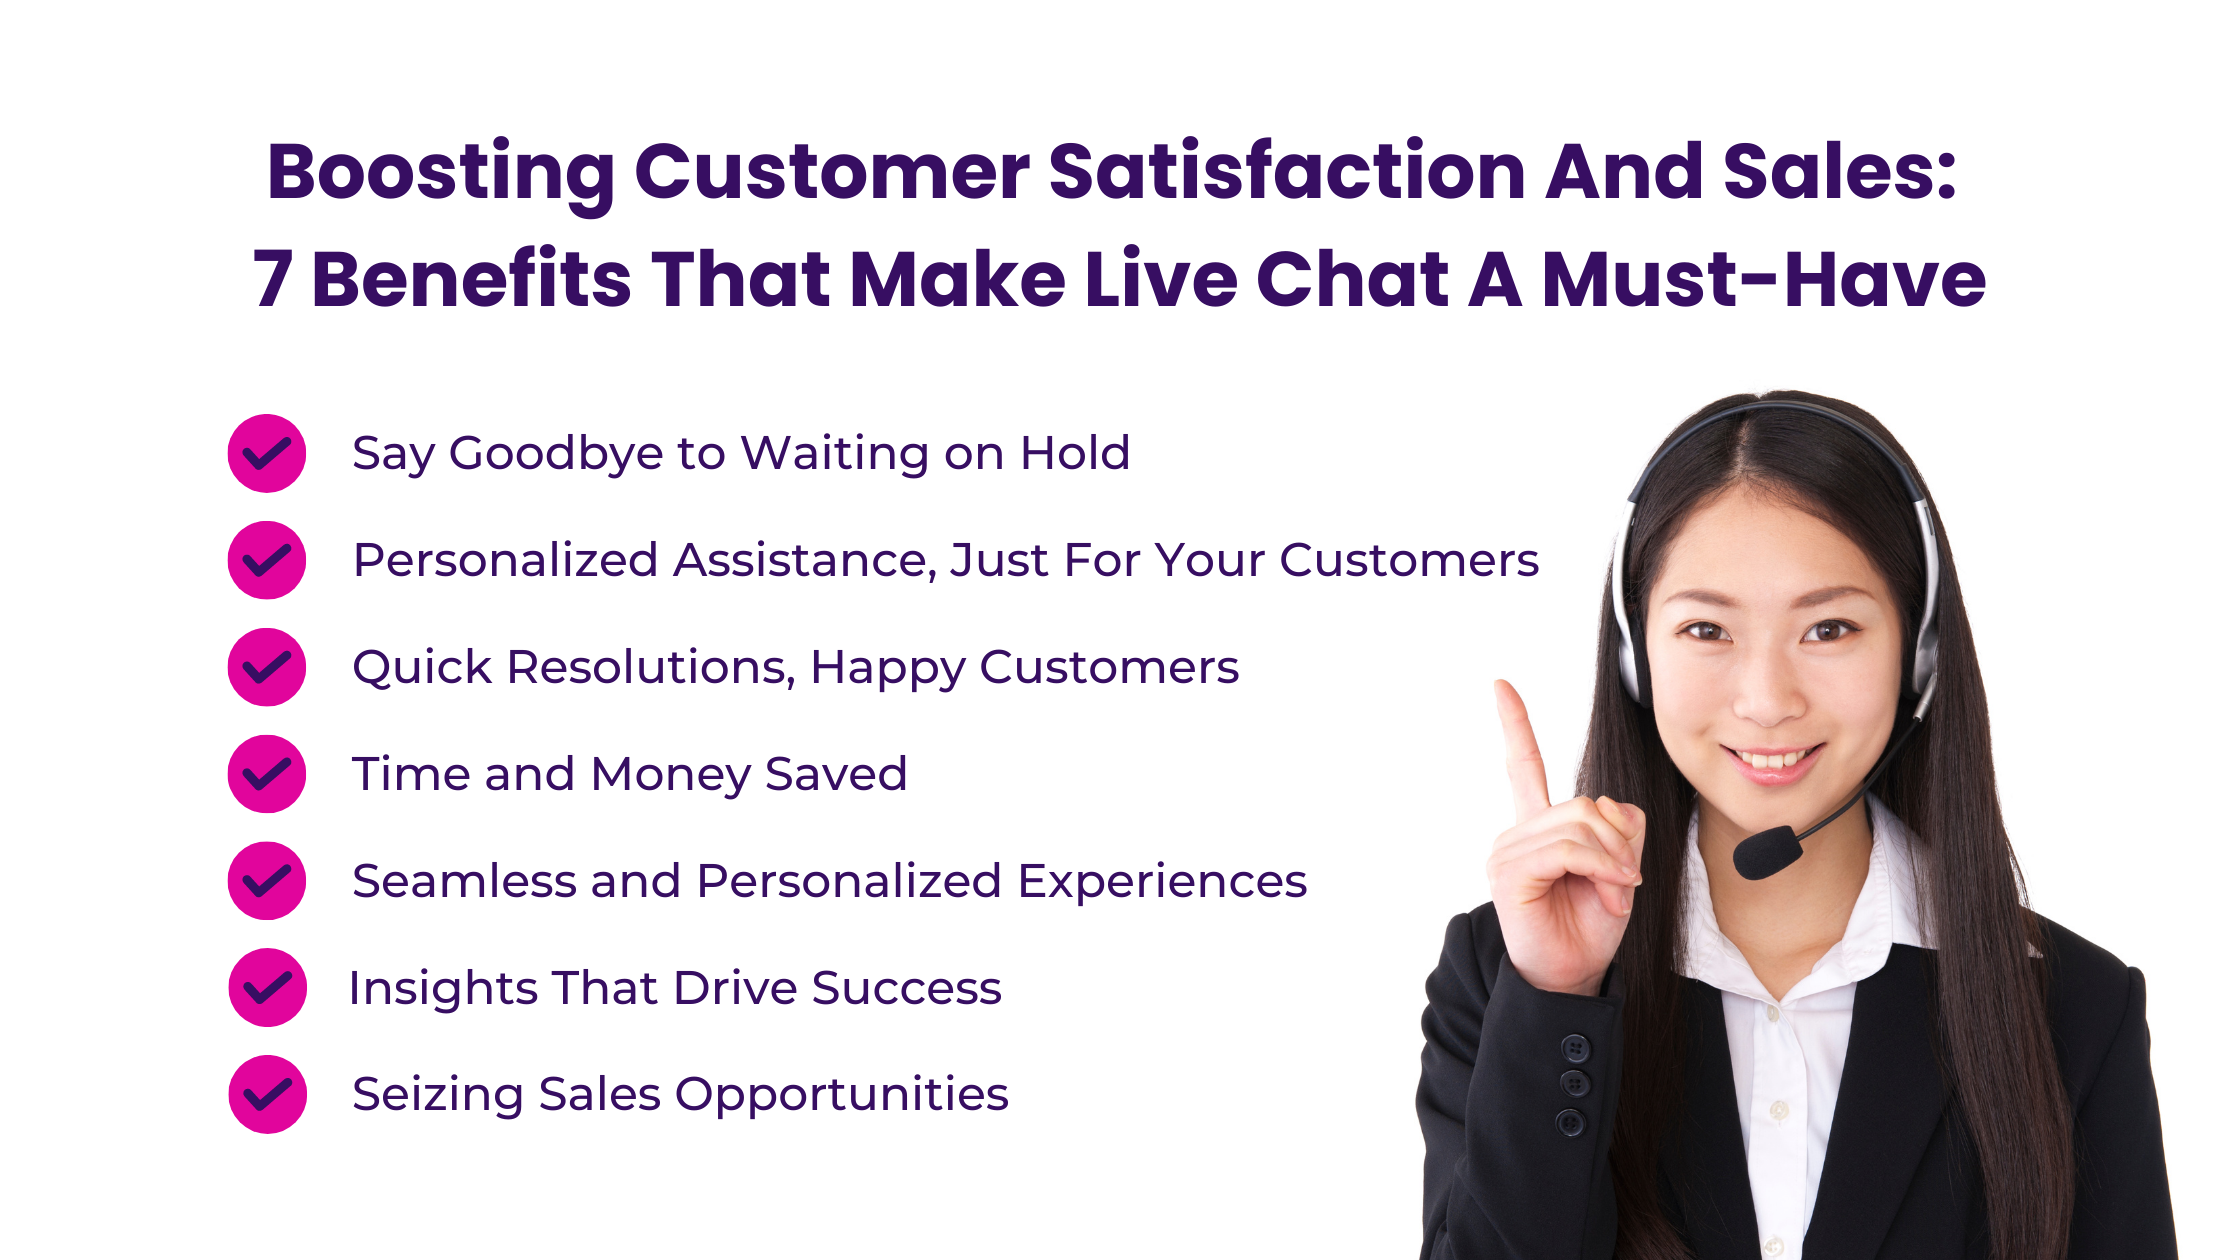 Boosting Customer Satisfaction And Sales 7 Benefits That Make Live Chat A Must-Have 2